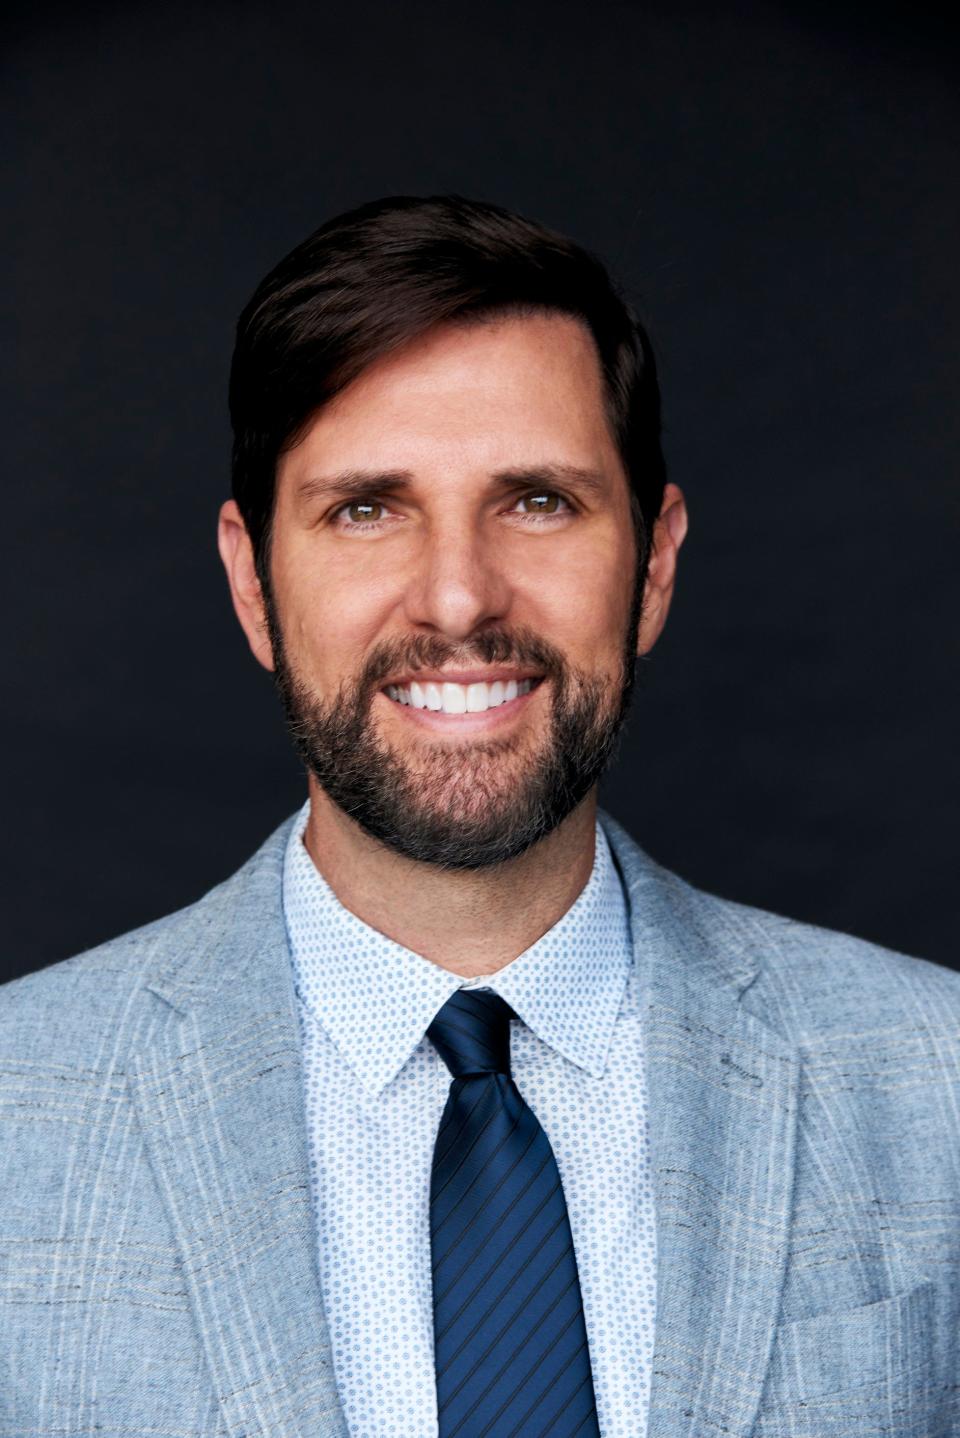 Damon Whiteside was named CEO of the Academy of Country Music on Dec. 9, 2019.